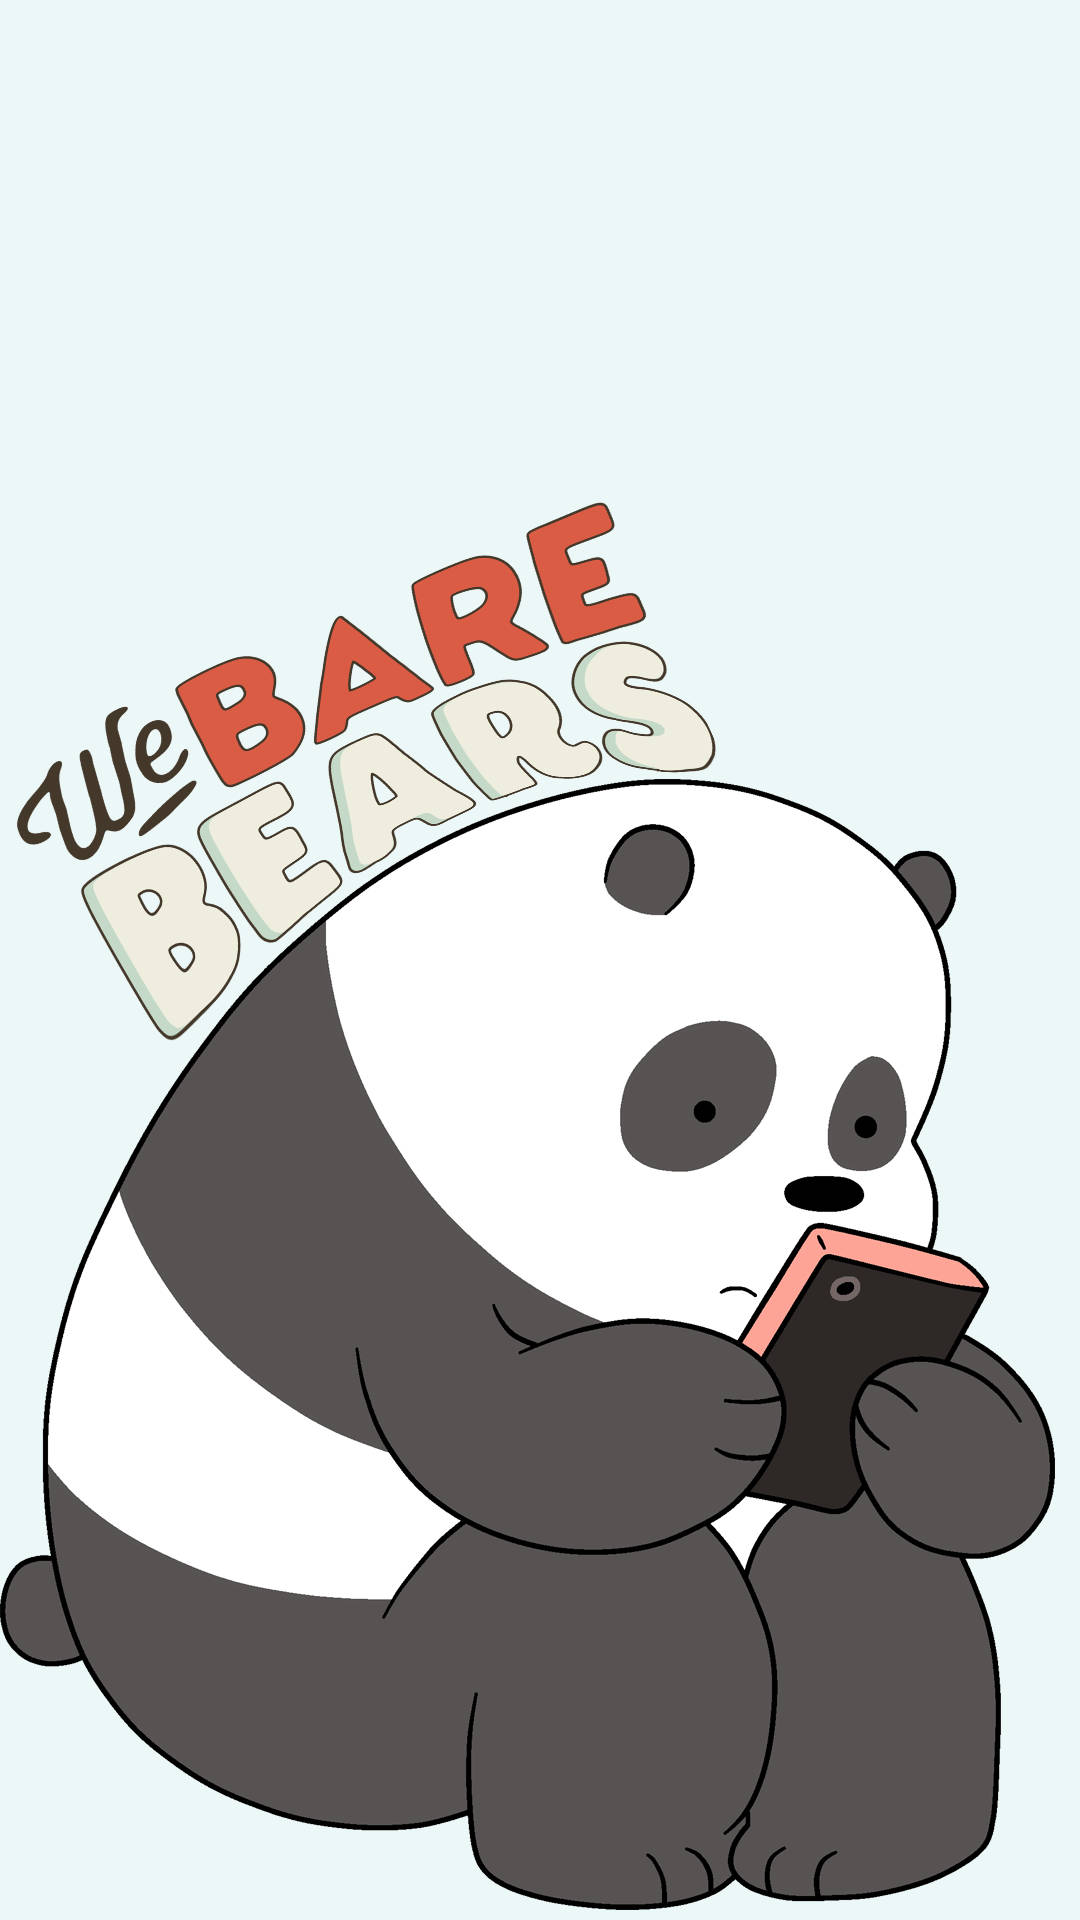 Introverted Panda We Bare Bears Wallpaper